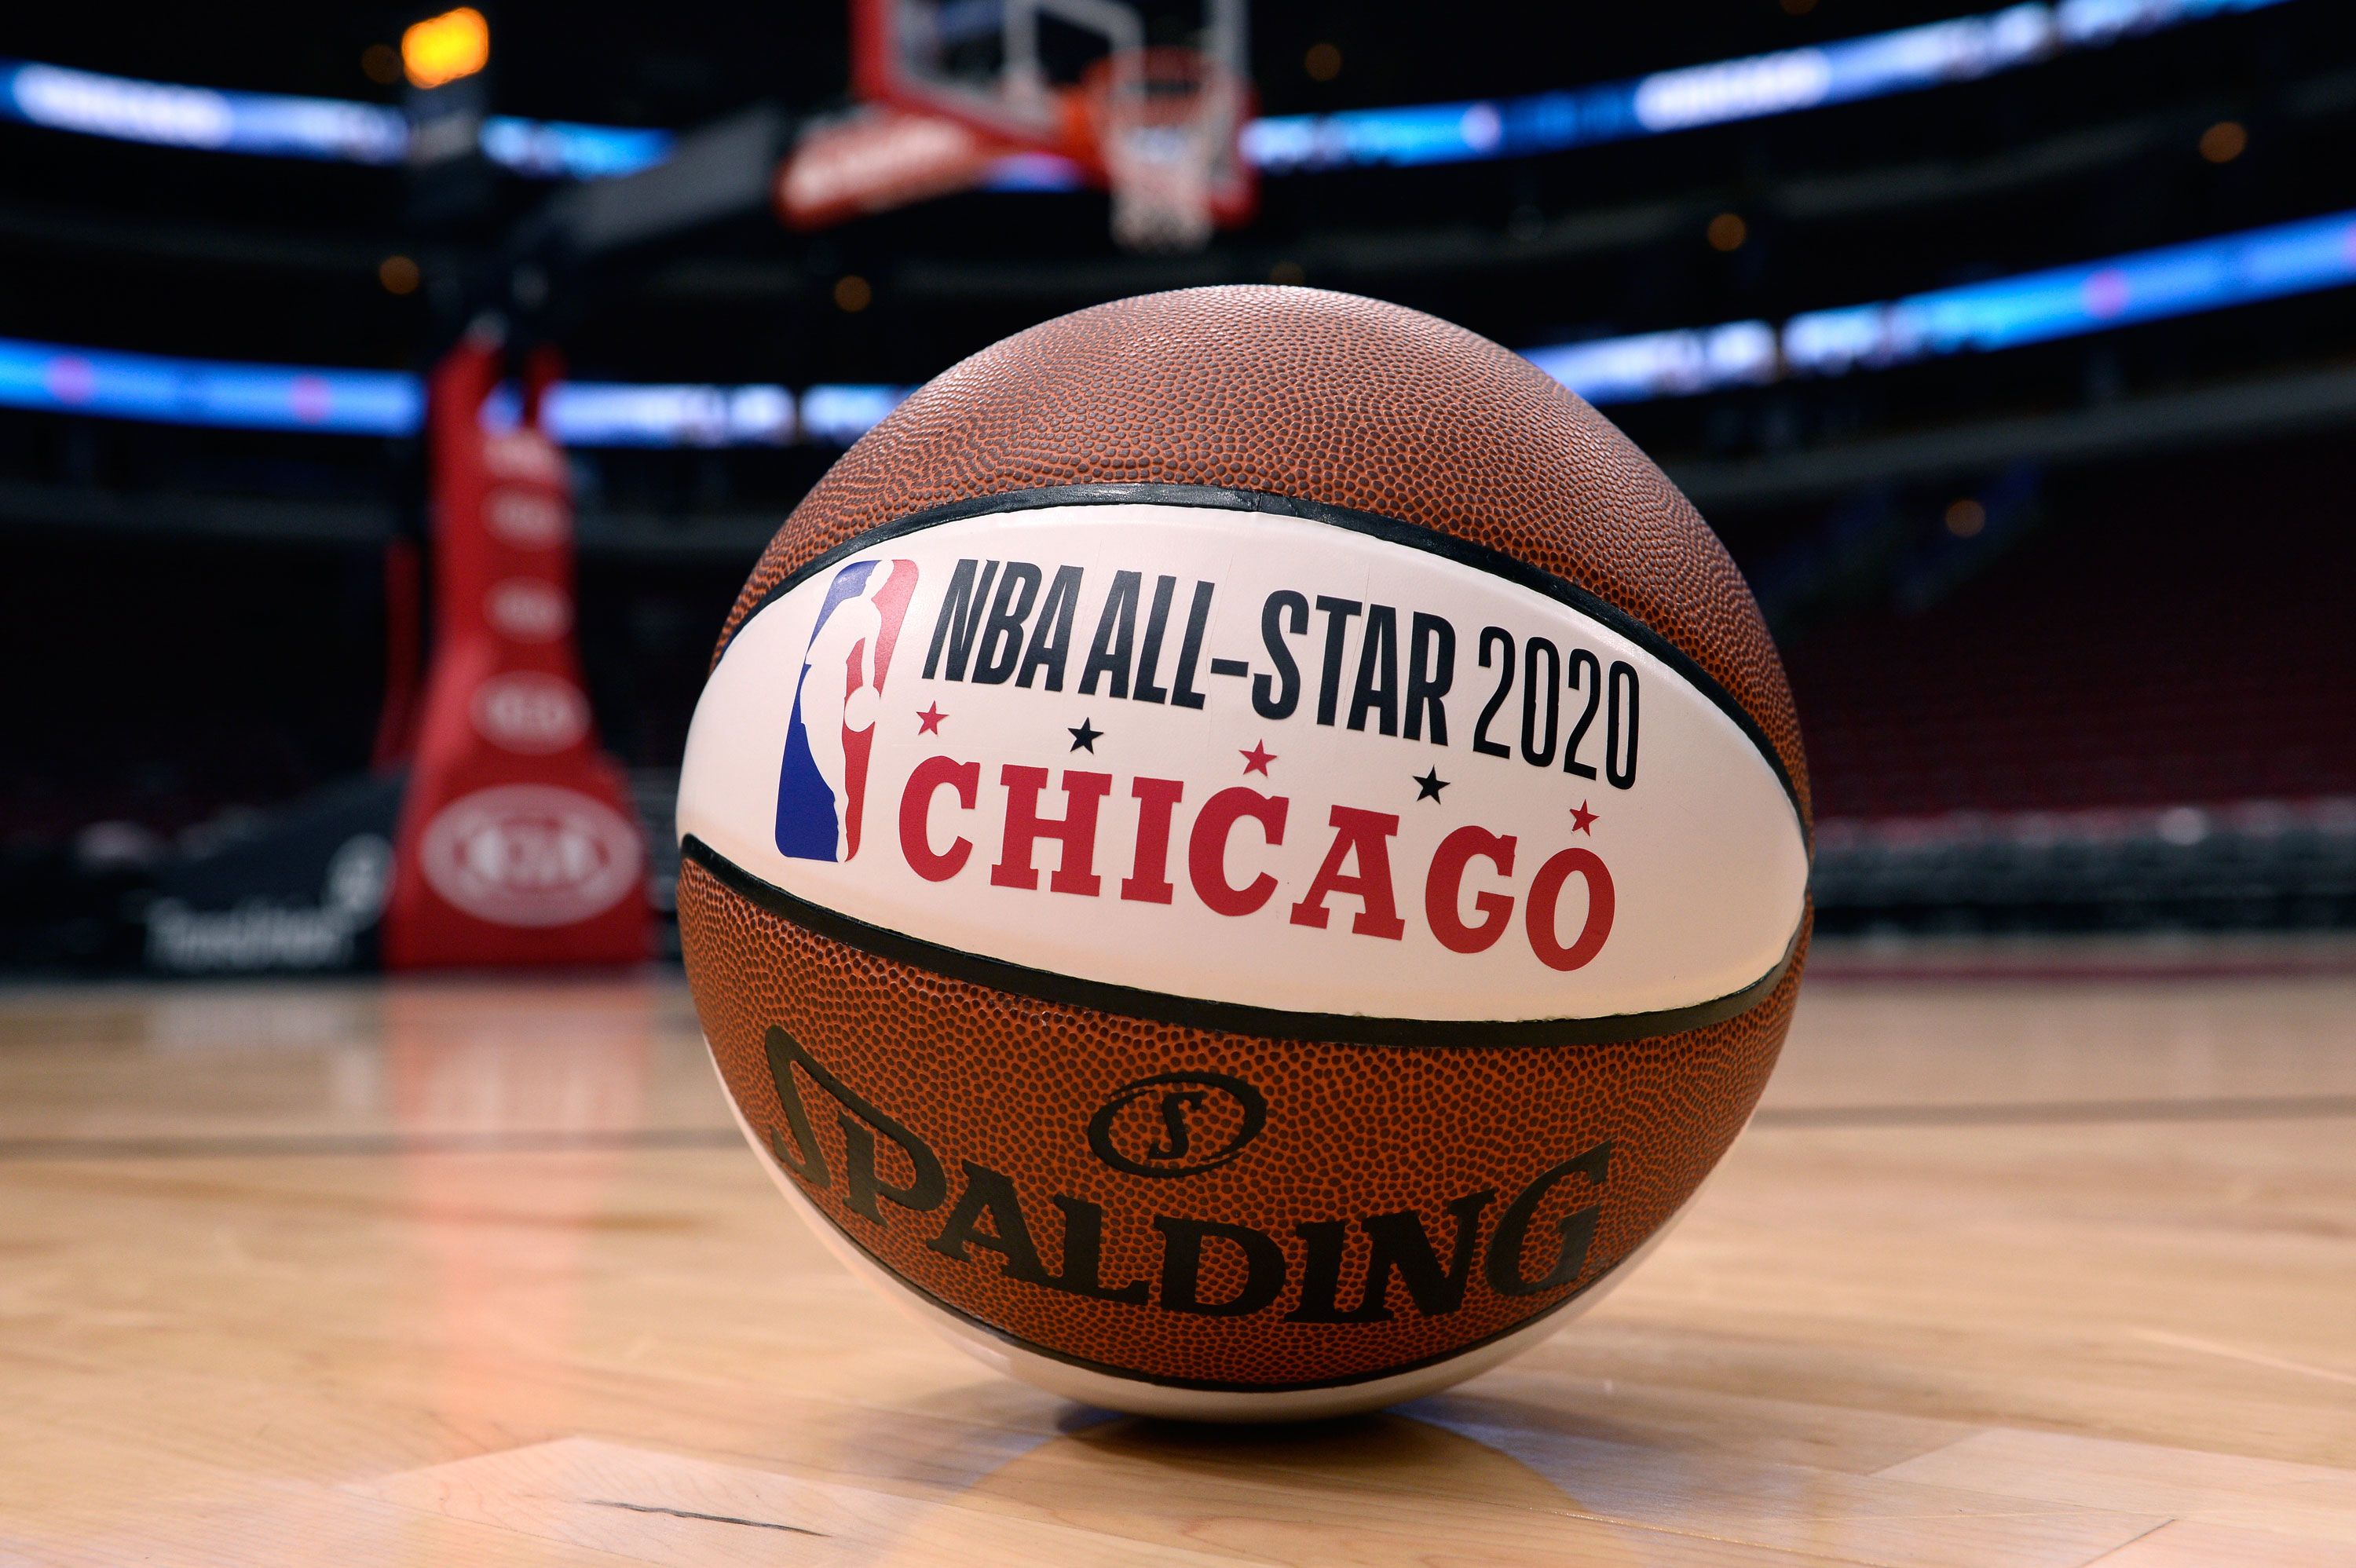 2020 NBA All-Star Game to be held in Chicago